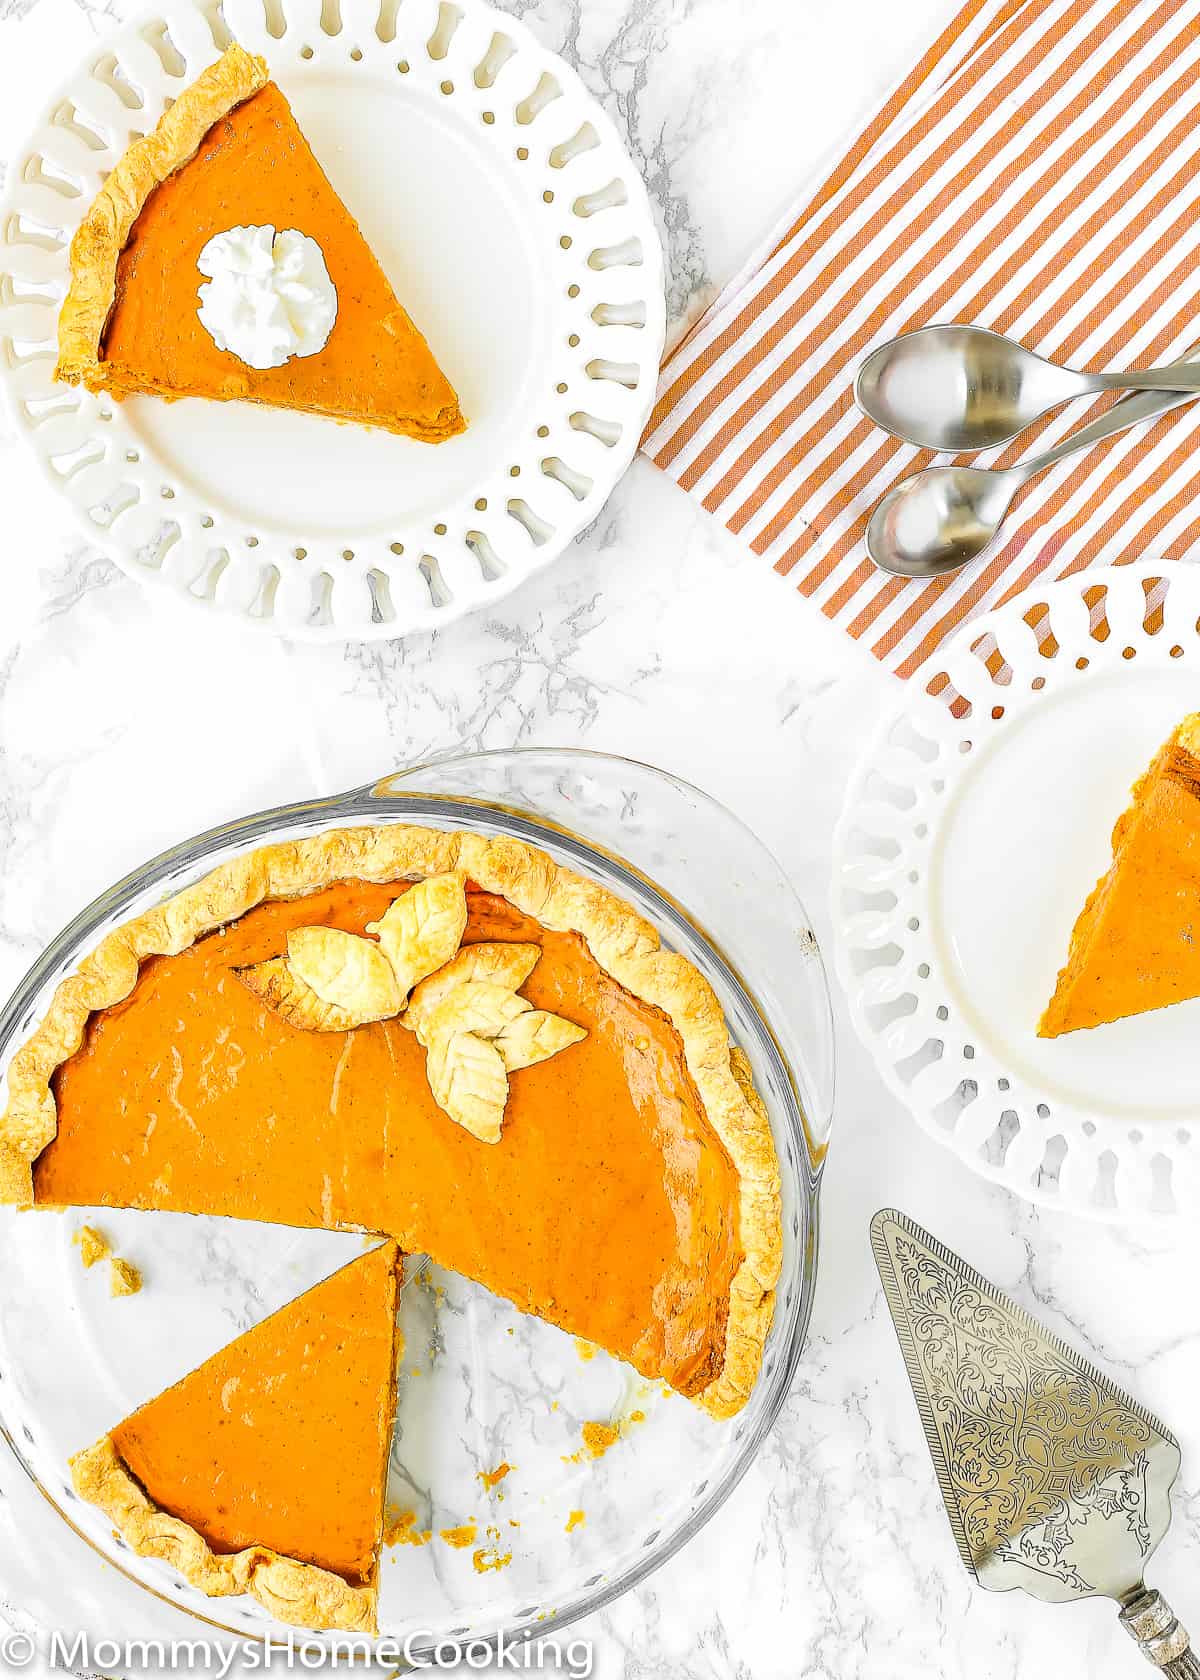 slices Eggless Pumpkin Pie with two white plates and two spoons over a marble surface